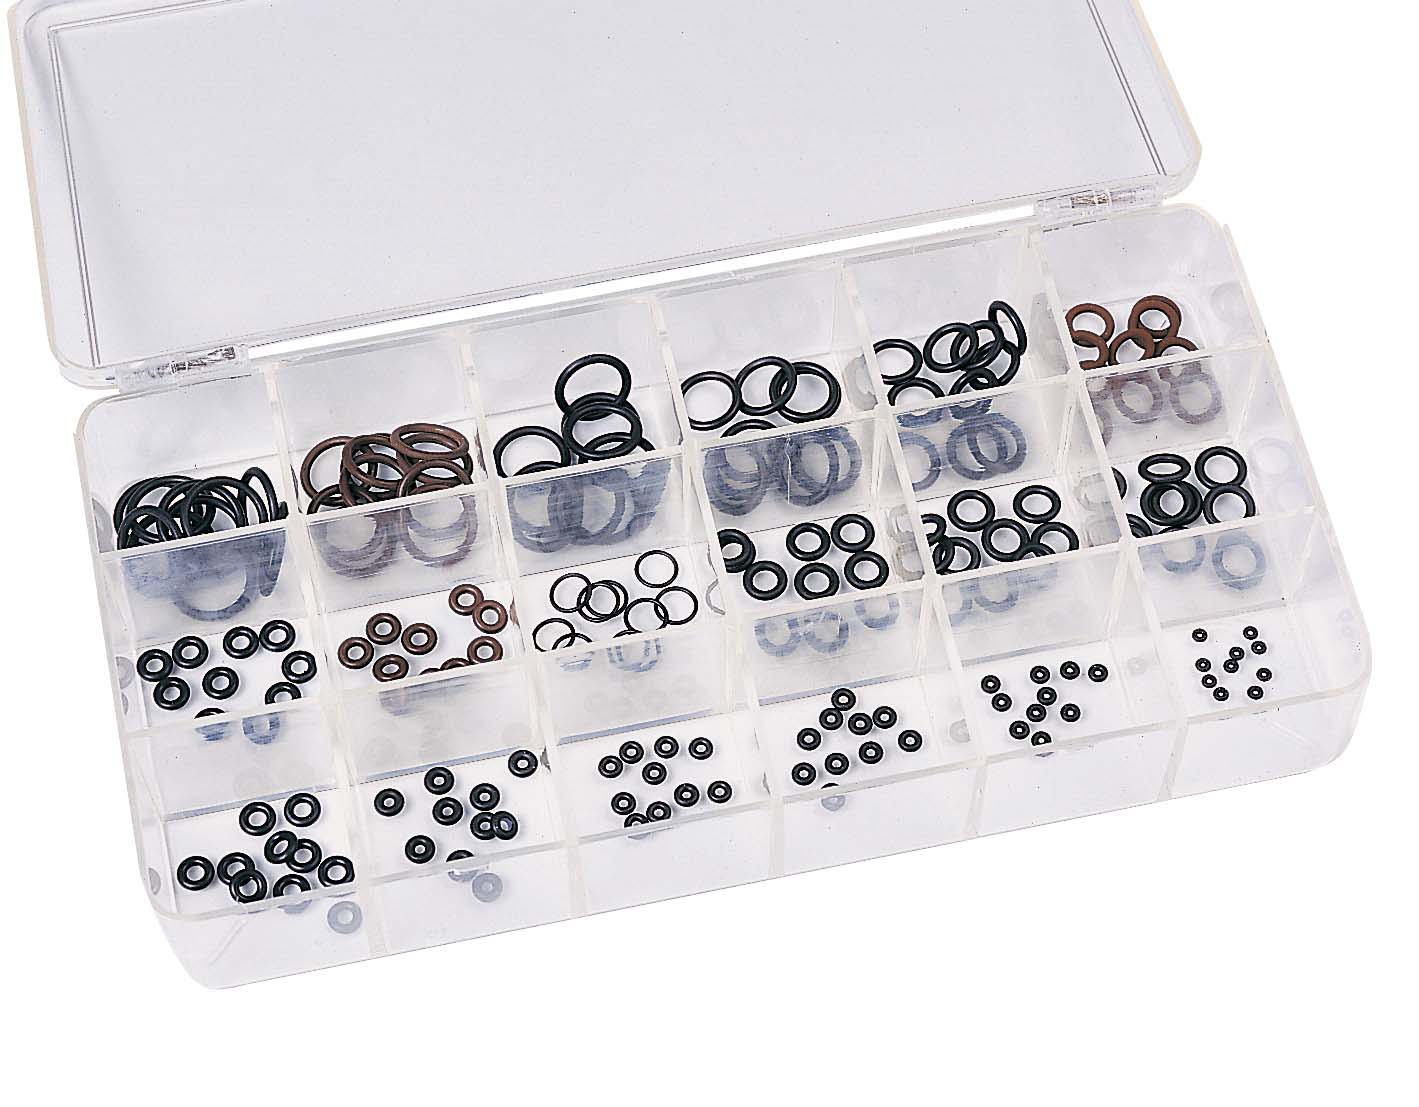 O-Ring Kit, Metric, Buna-N 70A Durometer, 385 Pieces, 30 Sizes | Great  Western Seal and Gasket